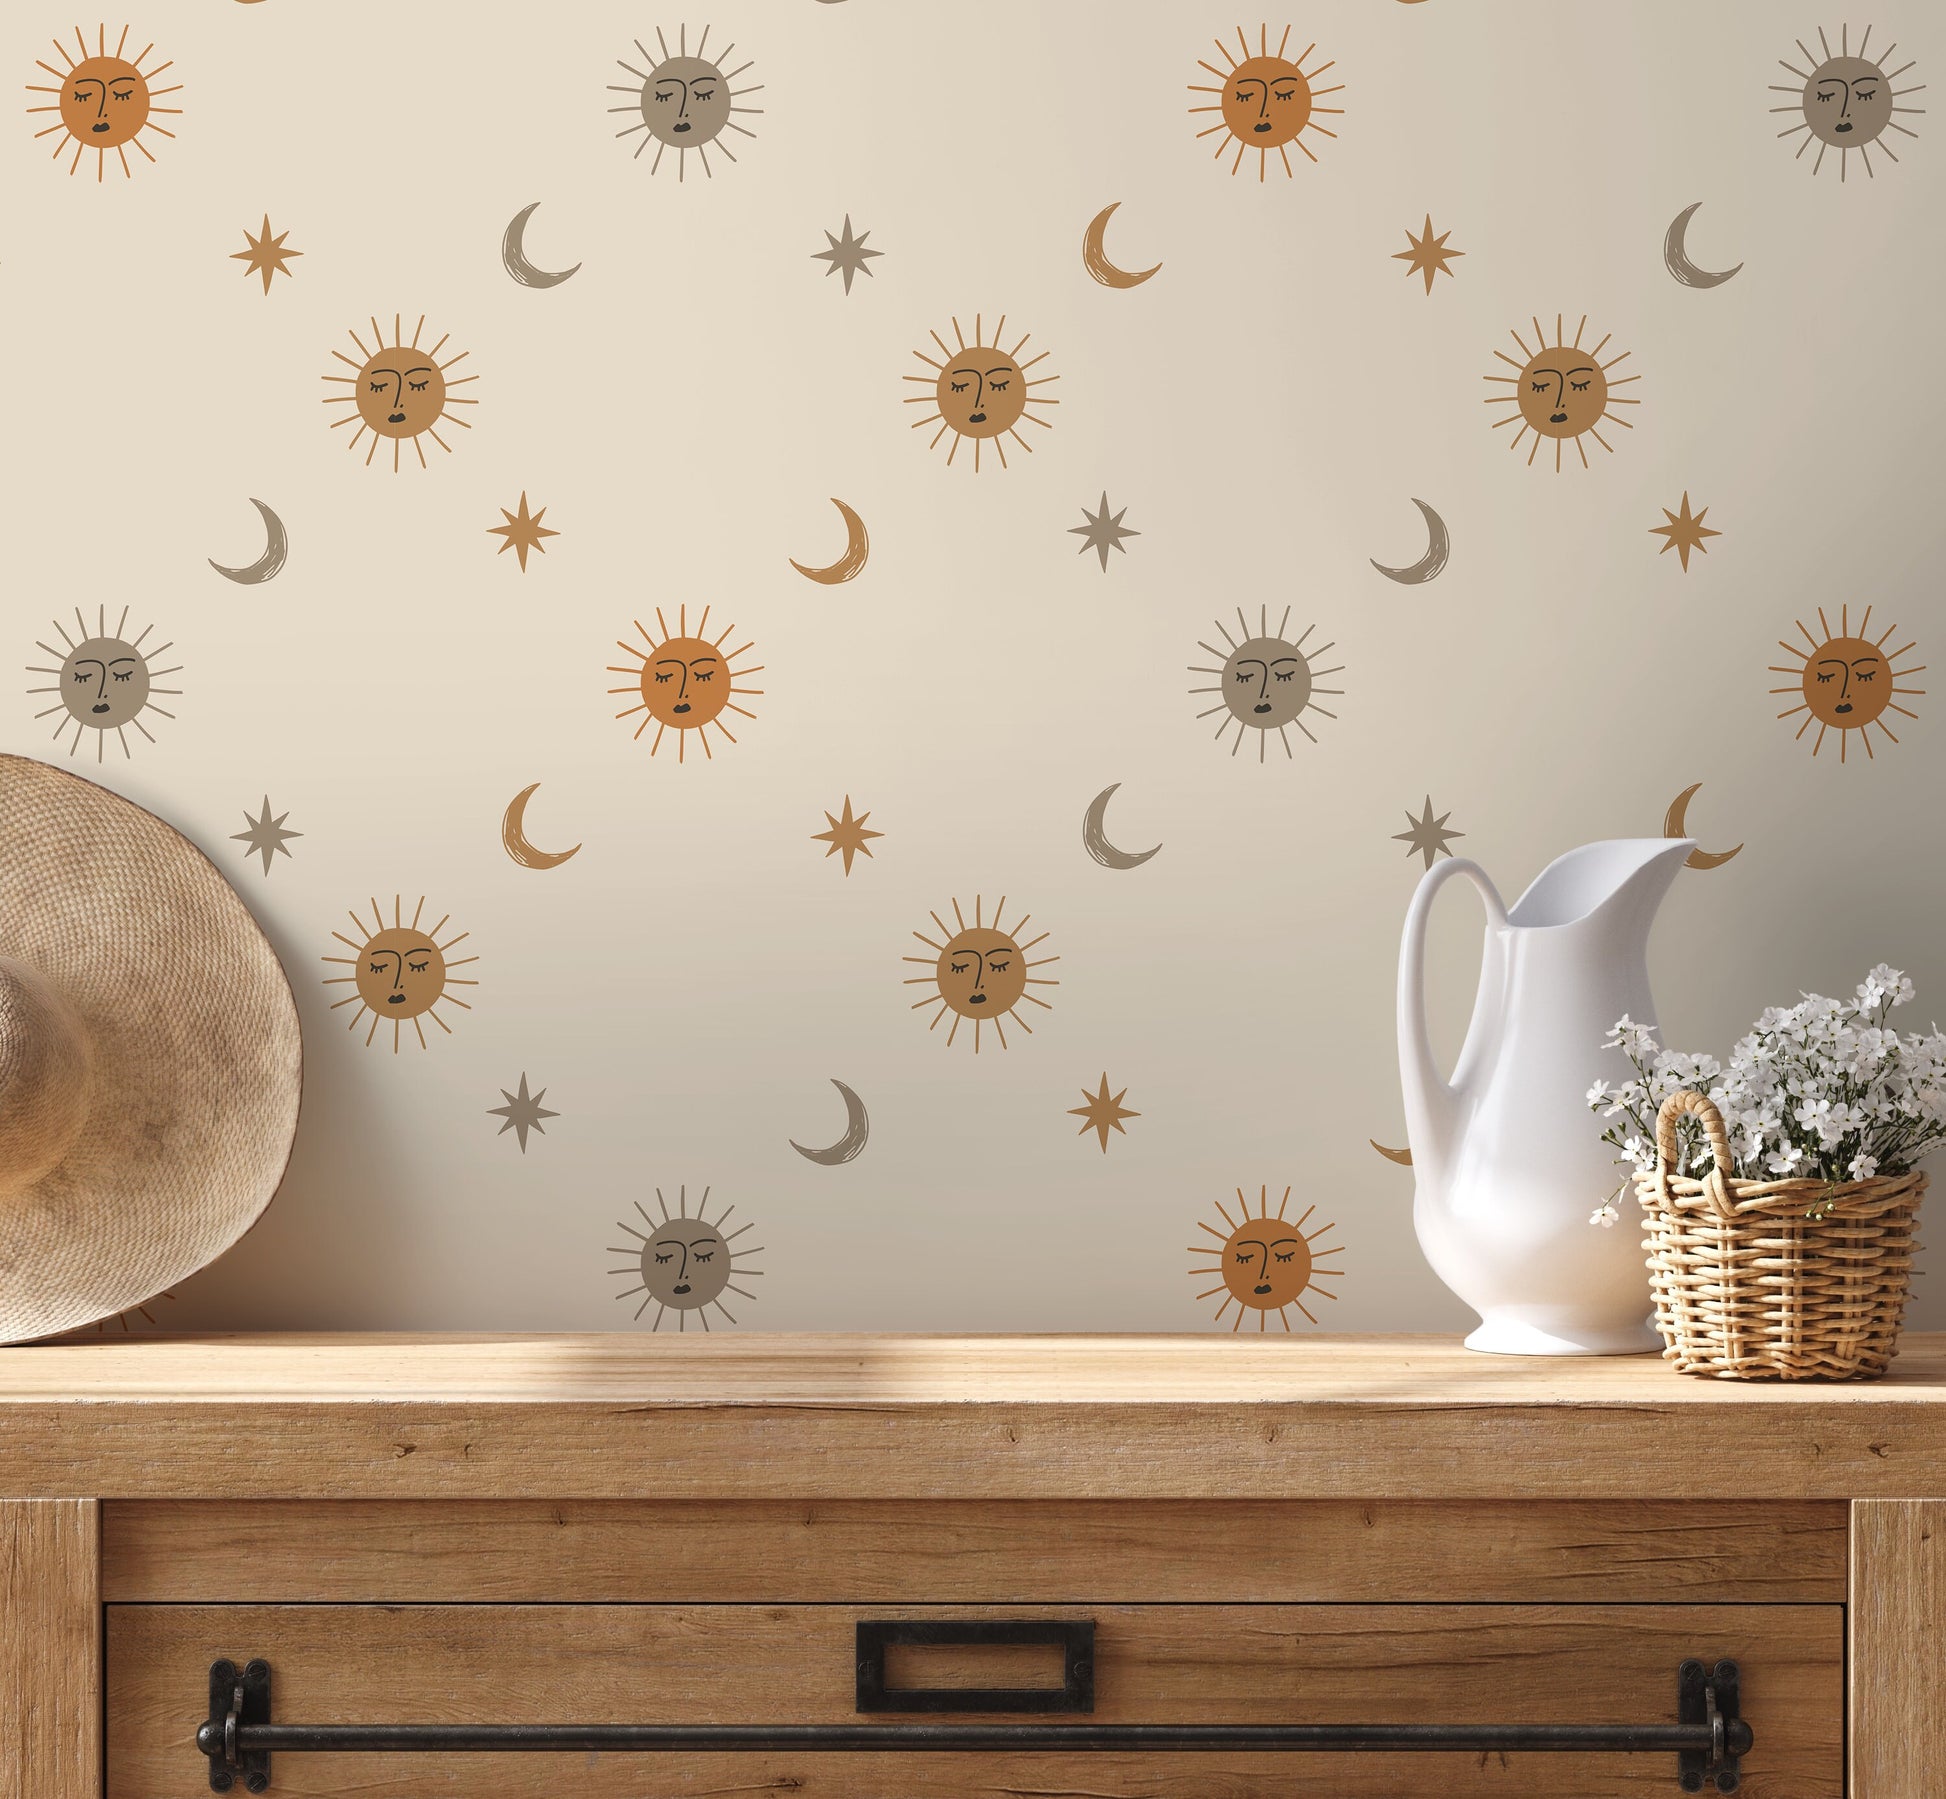 Sun and Moon Wallpaper Removable Peel and Stick Wallpaper, Mystic Boho Constellation Peel and Stick Wallpaper - ZACA